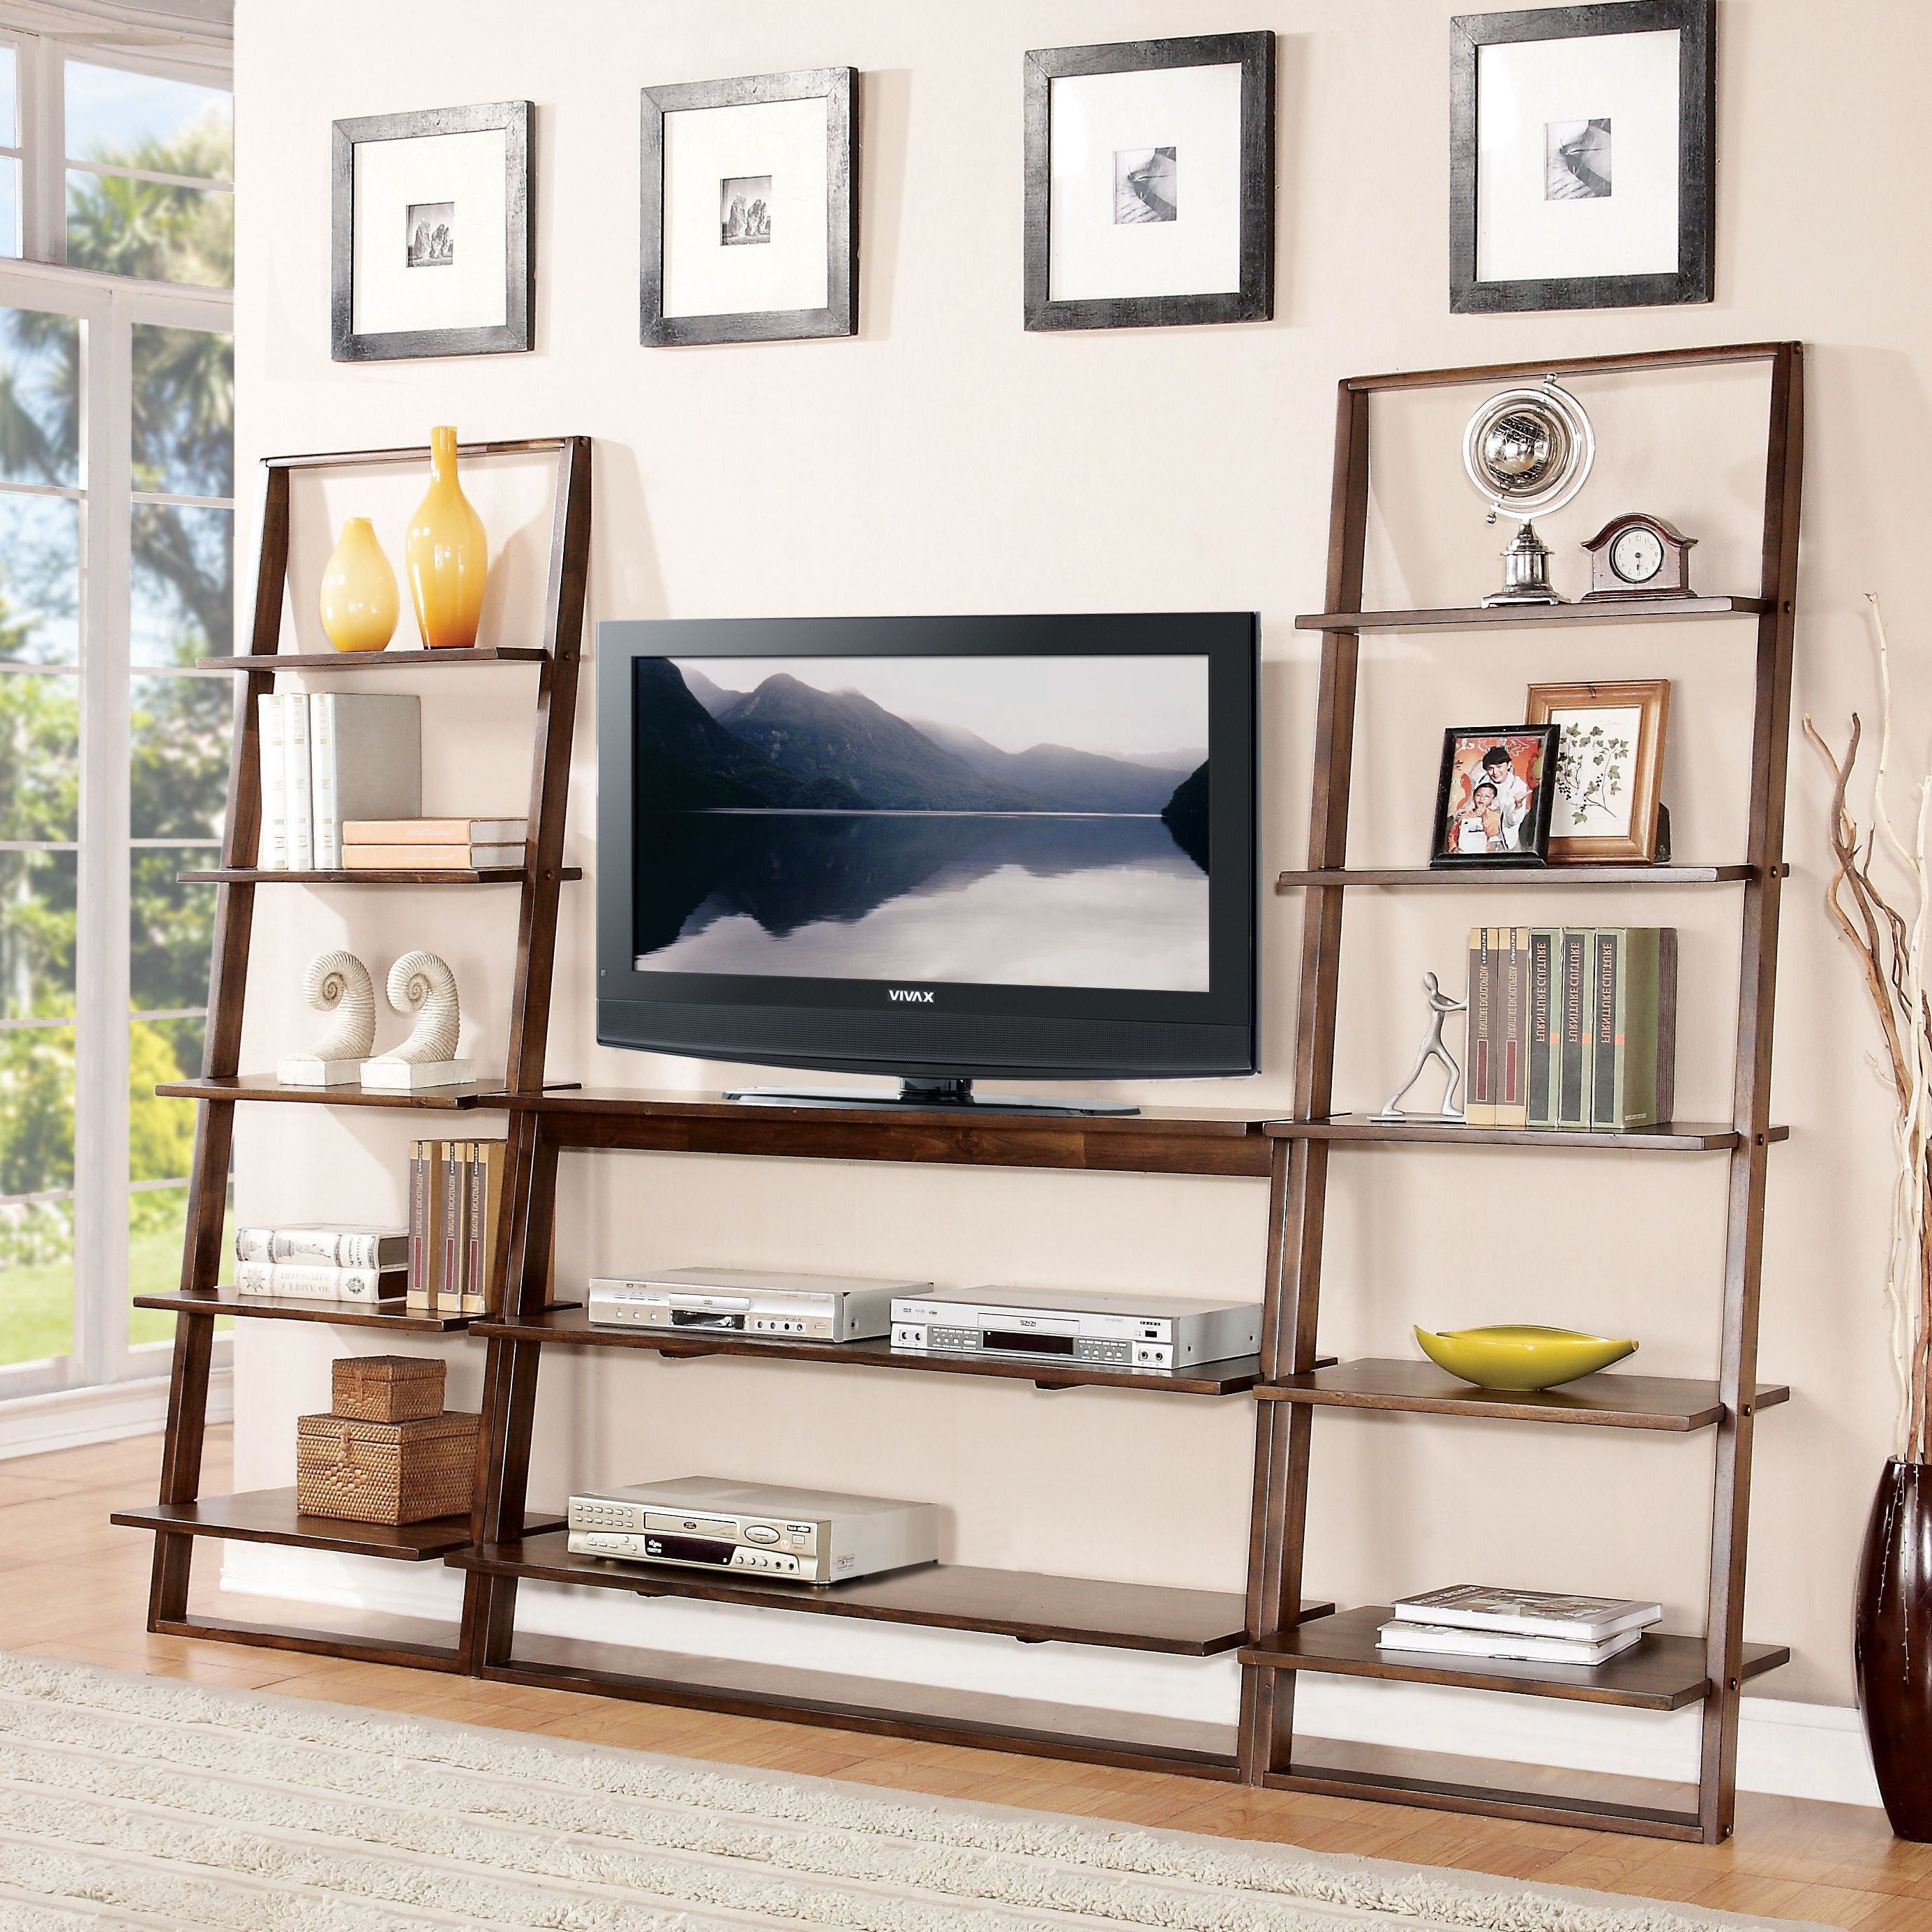 Inspiring Space Saving Ideas Using Leaning Bookcase: Amazing Leaning For Well Known Bookshelf And Tv Stands (View 5 of 20)